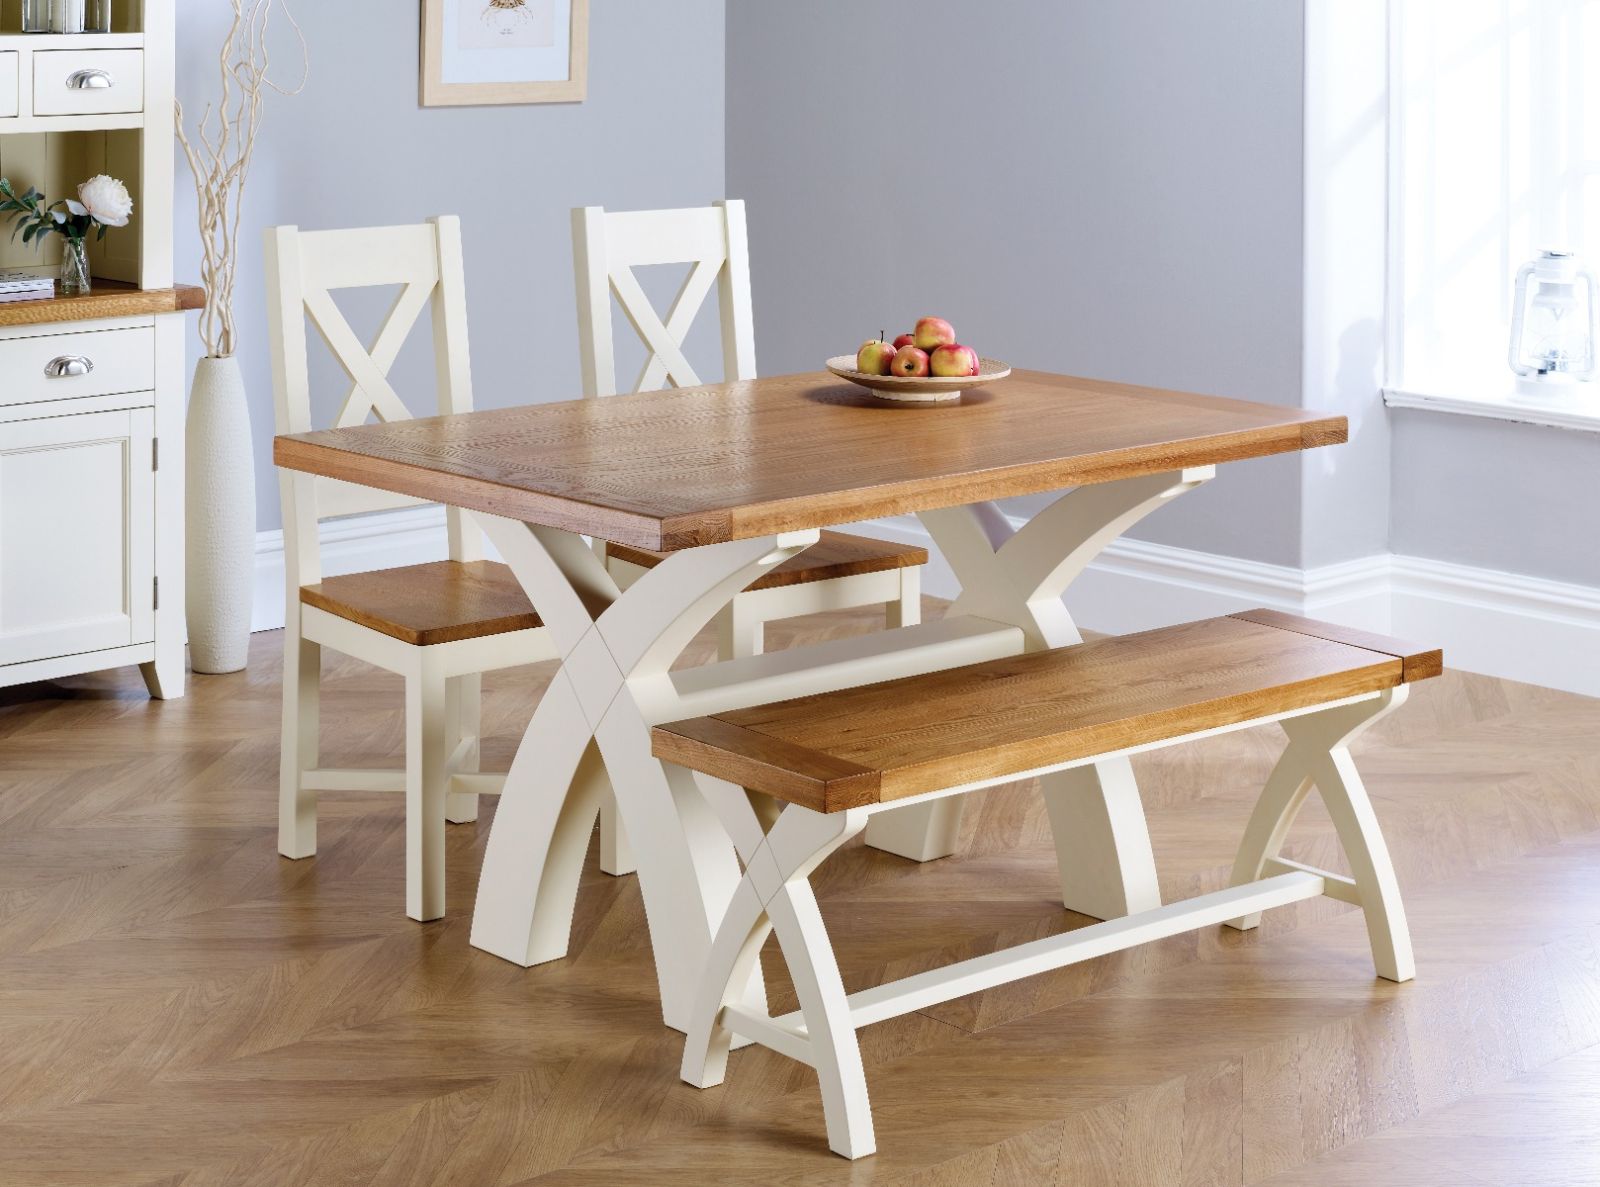 Country Oak 140cm Cream Painted X Leg Table 2 x Matching Chairs & Bench Dining Set - WINTER SALE